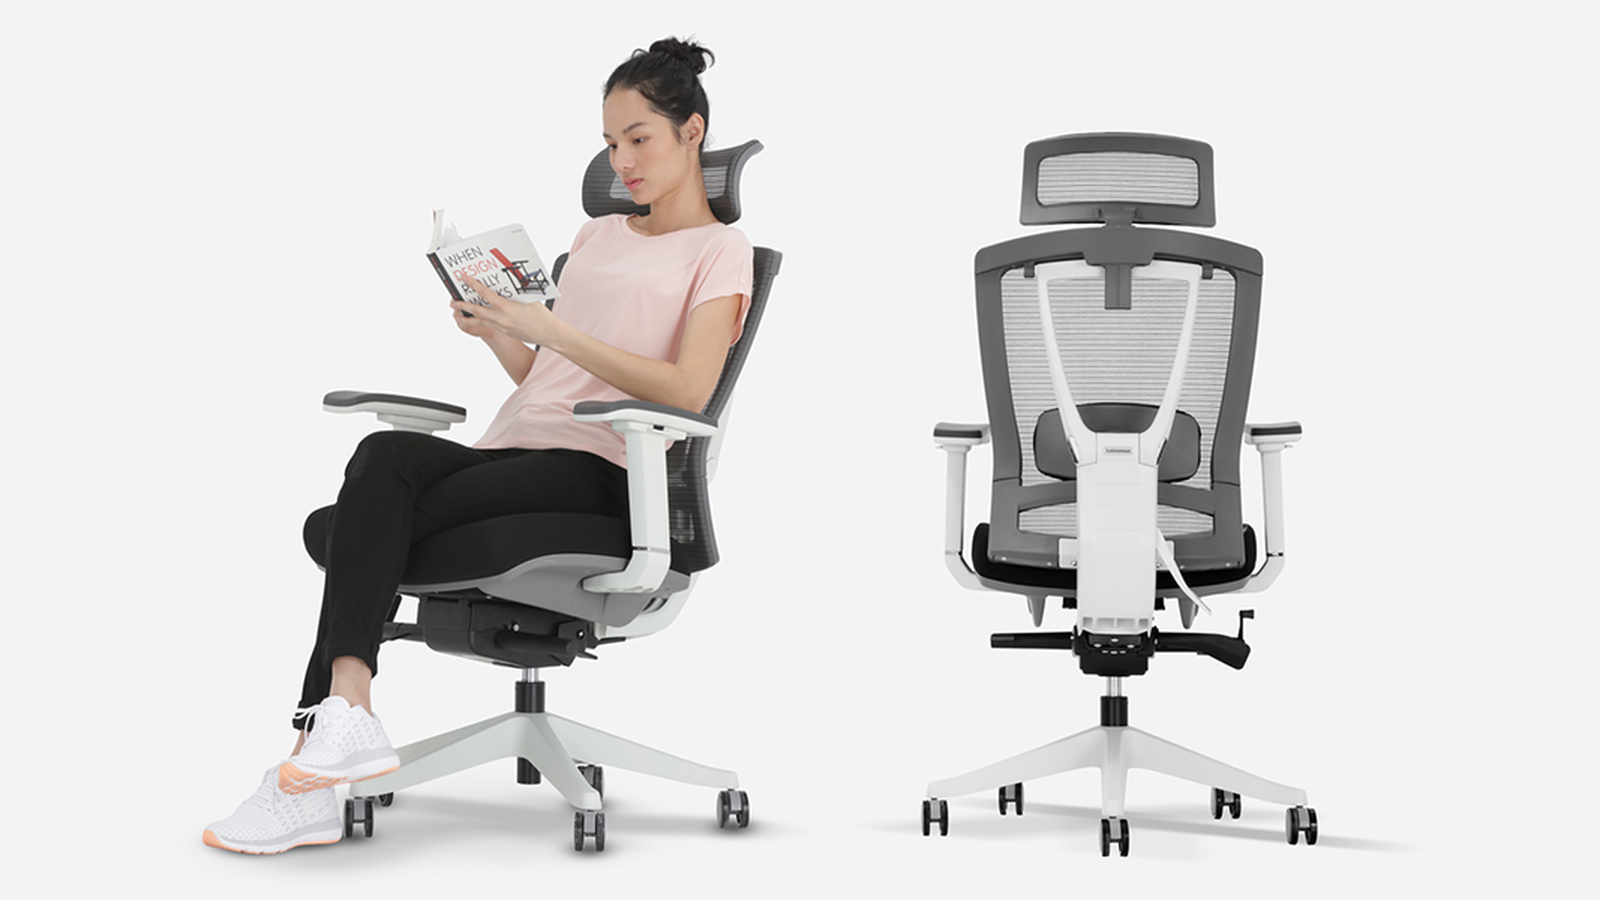 Why the ErgoChair Pro is Considered One of the Best Ergonomic Office Chairs